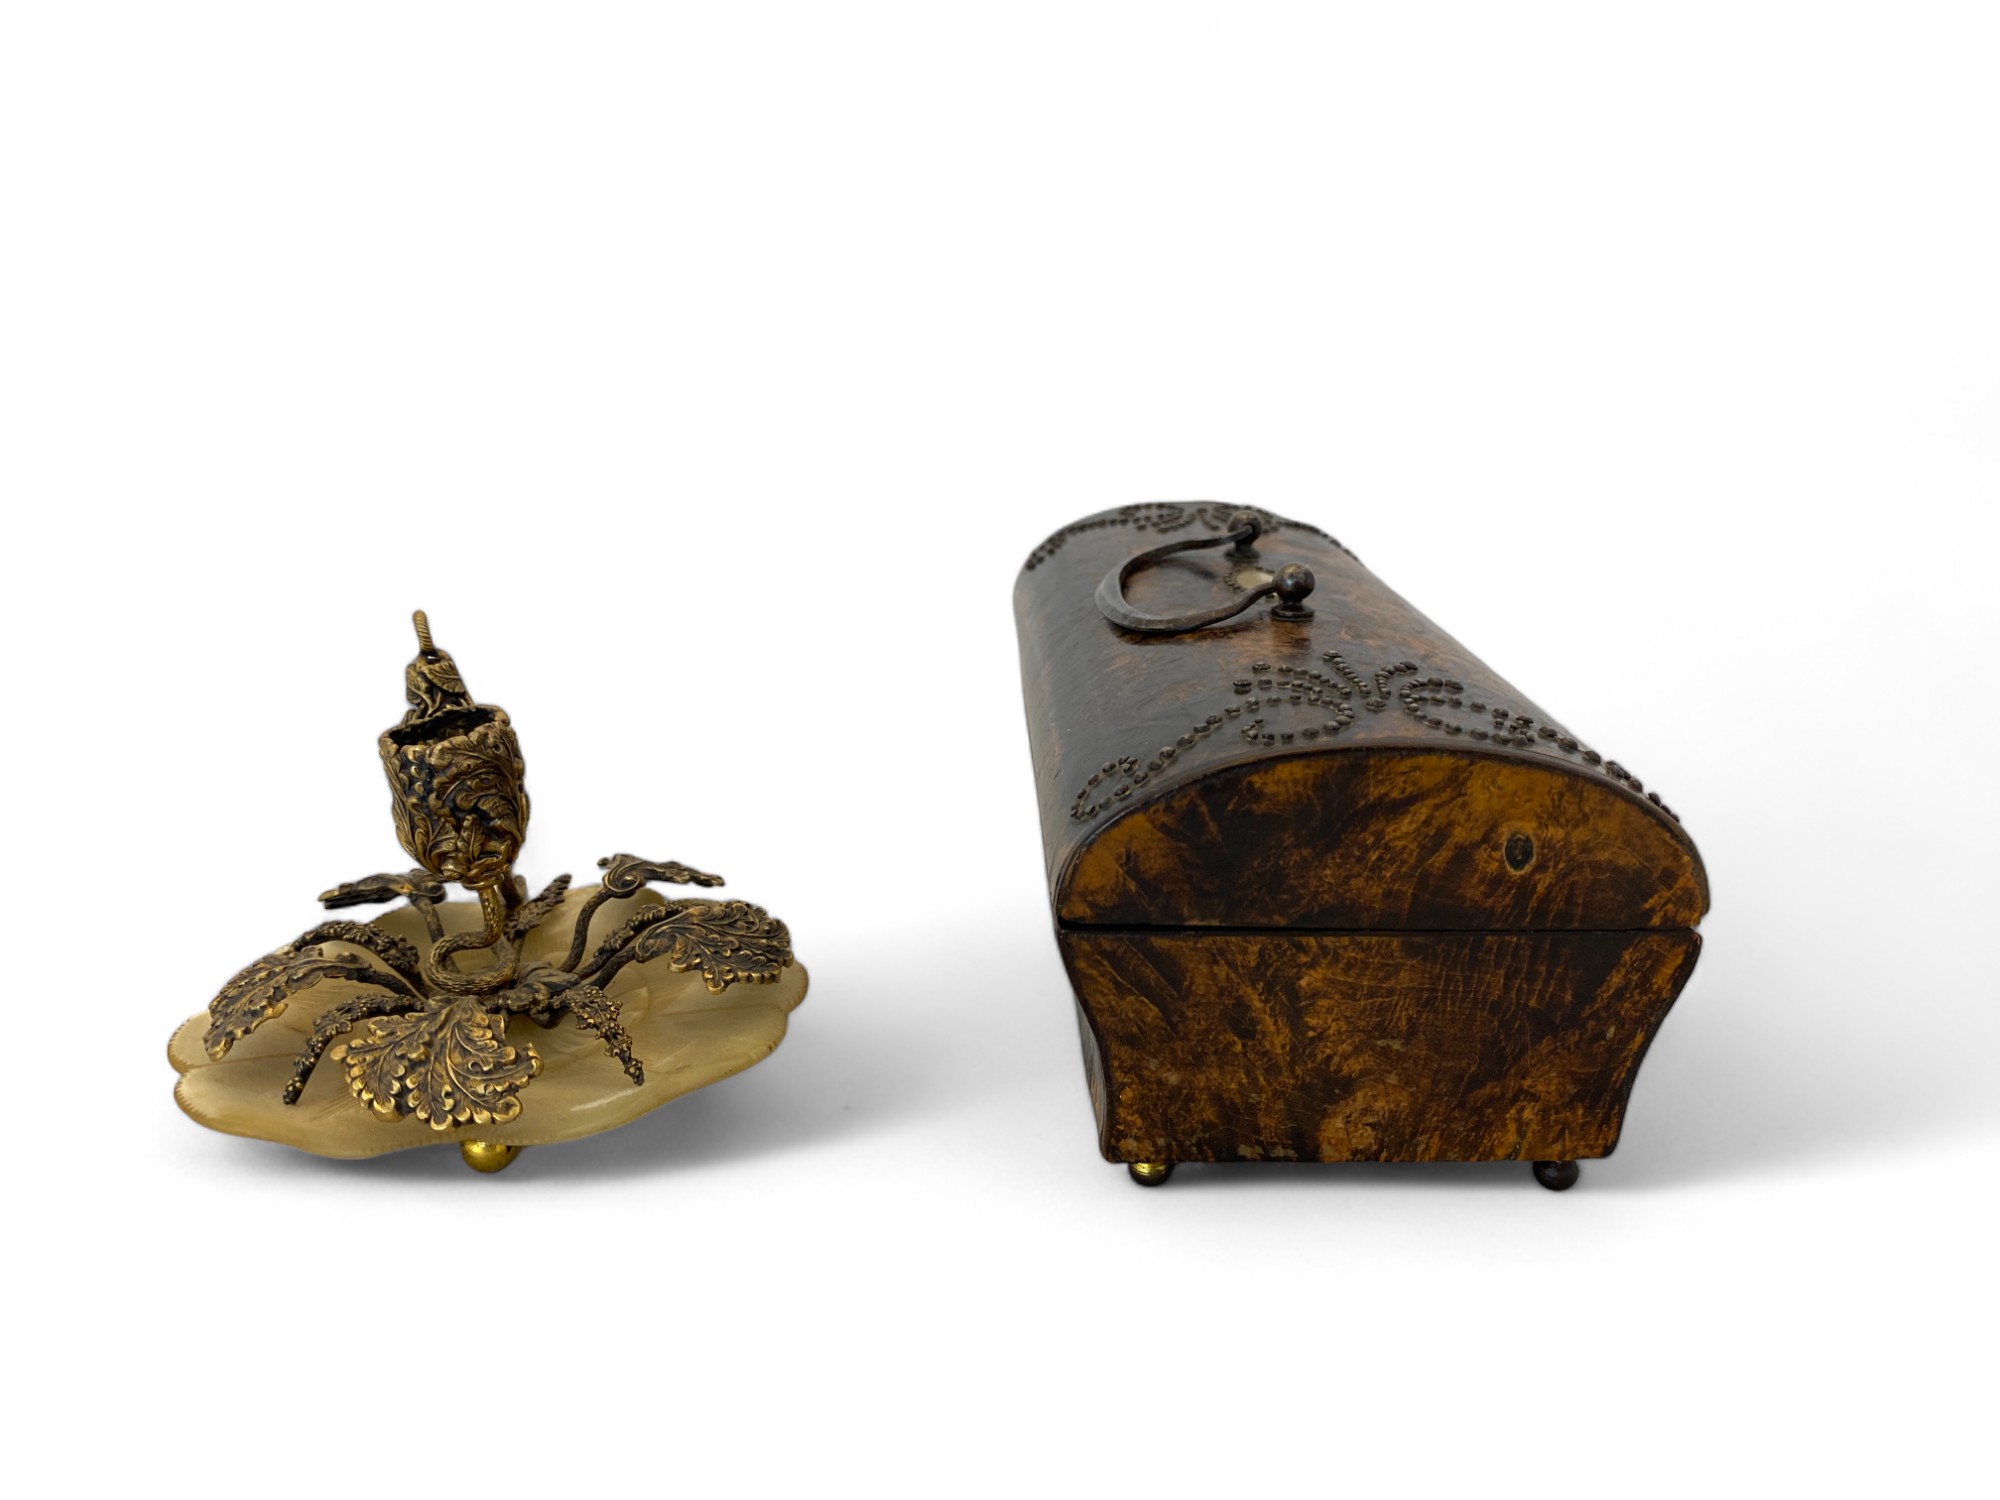 A mid 19th century French small burr walnut and cut steel decorated casket by Irlande, Palais Royal - Image 2 of 8